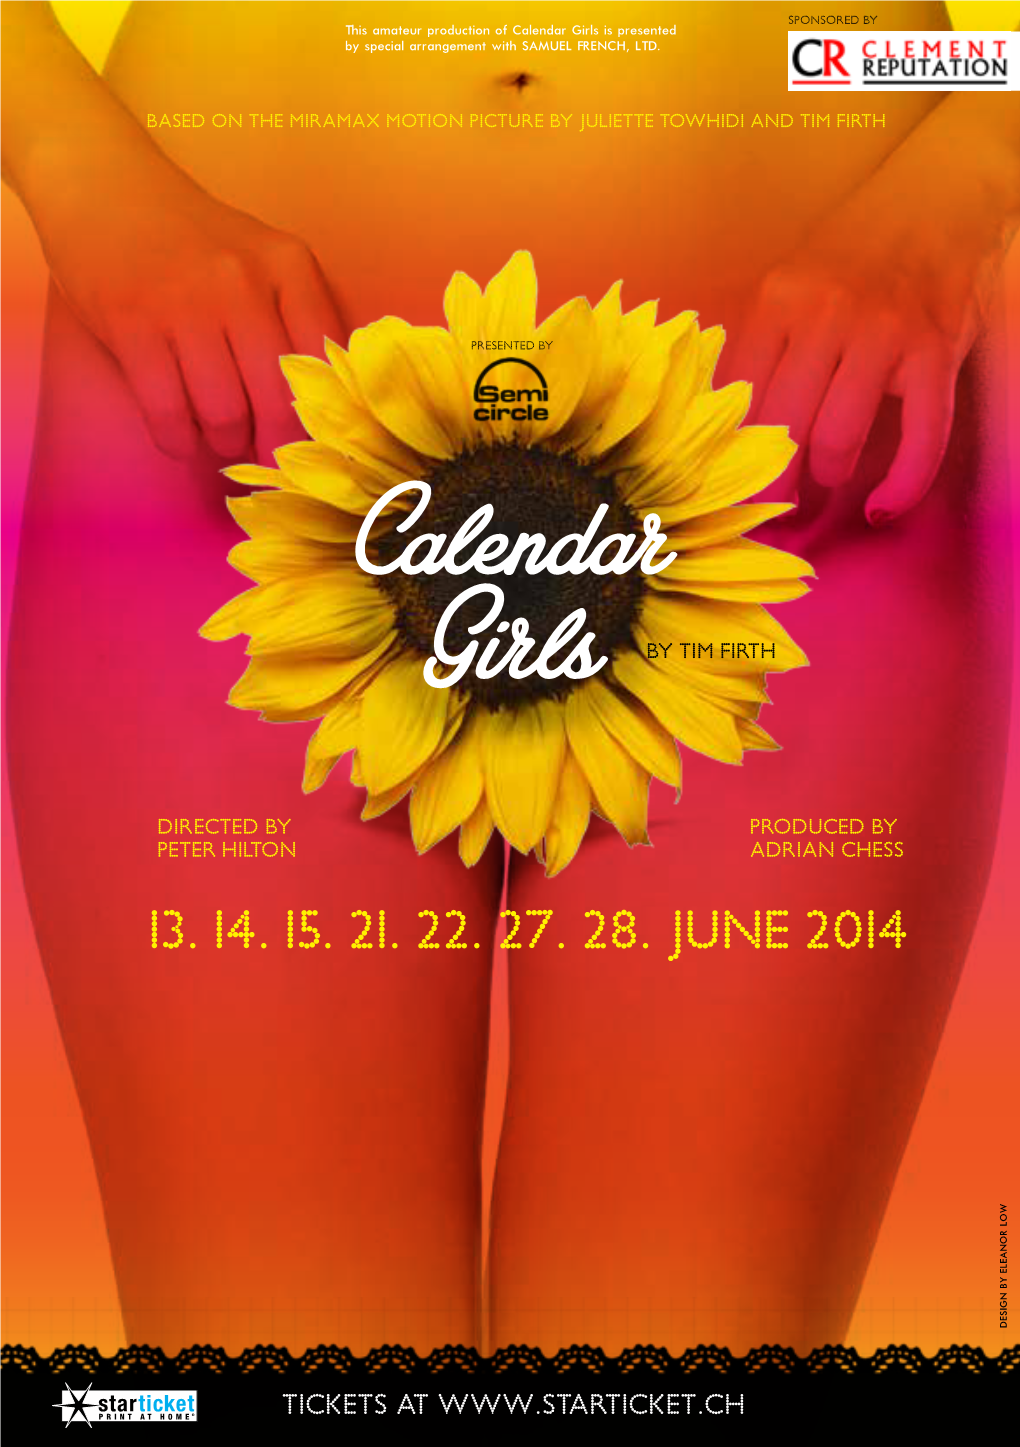 Calendar Girls” Is Presented by Special Arrangement with SAMUEL FRENCH, LTD